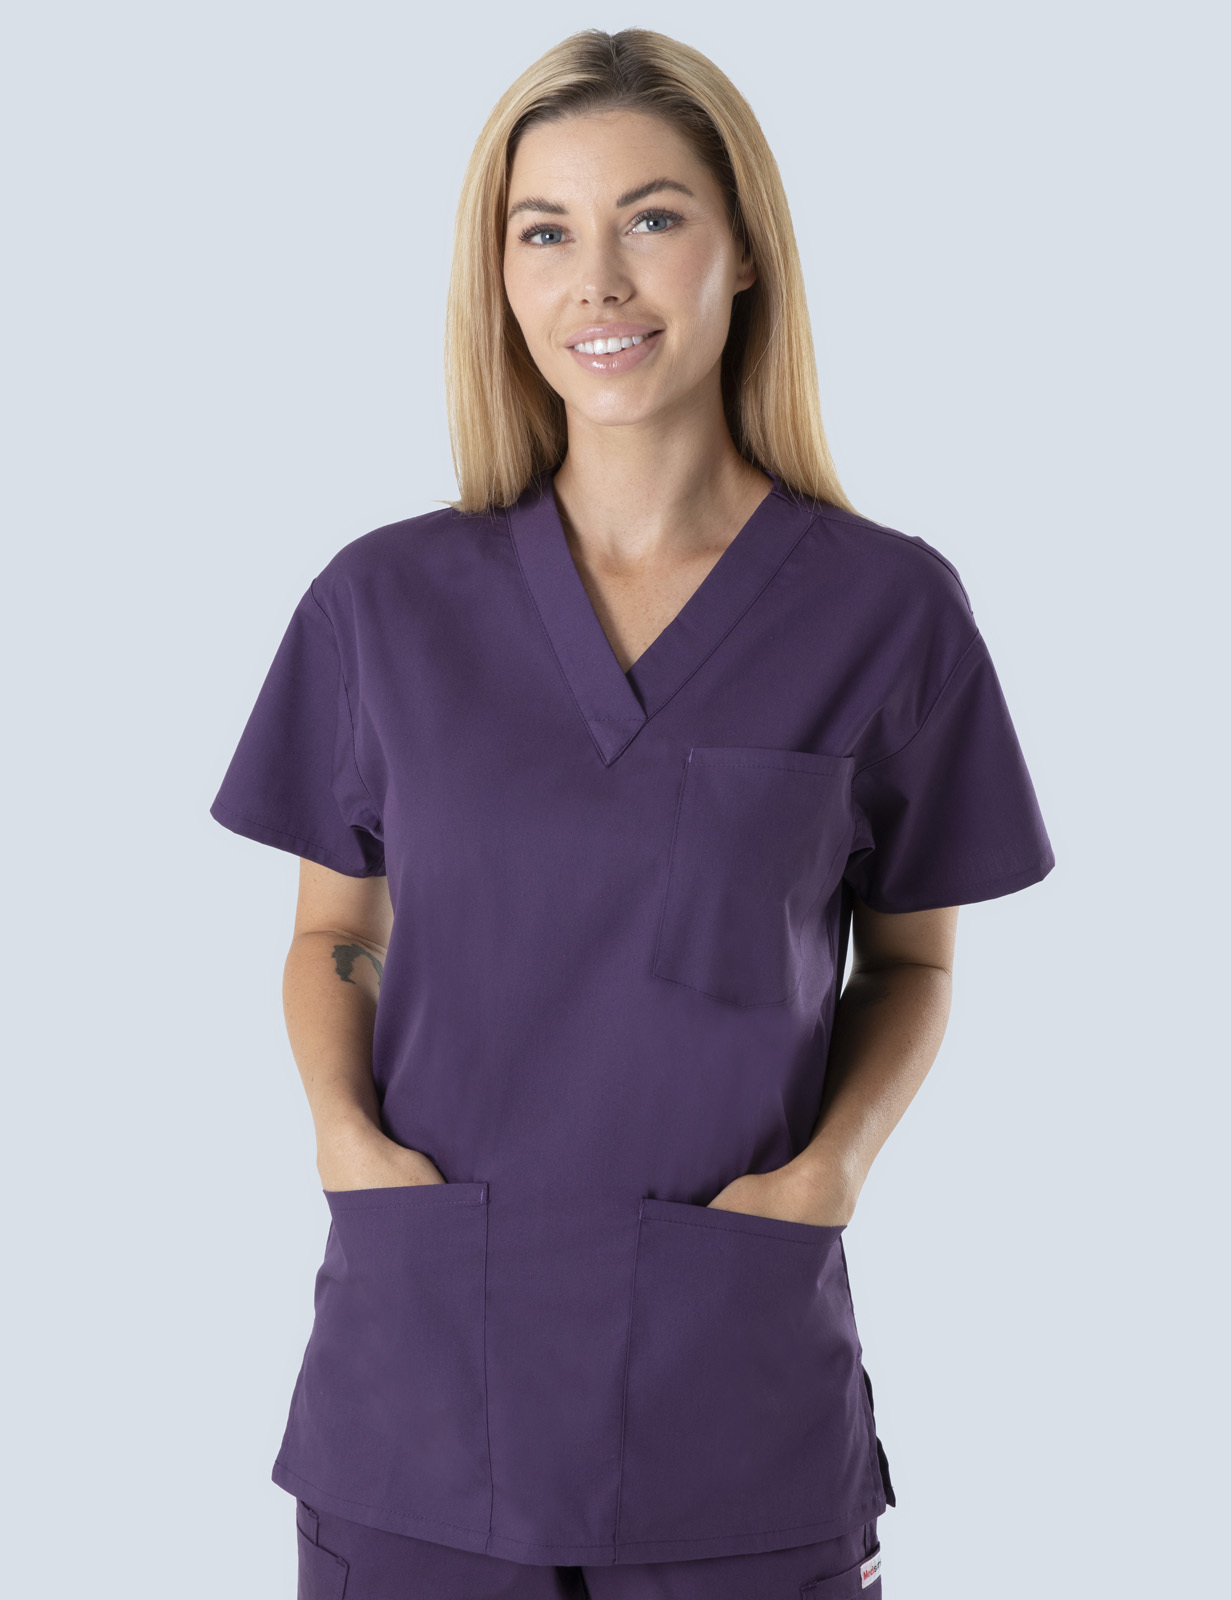 Townsville Hospital Pharmacy Uniform Top Only Bundle (4 Pocket Top in Aubergine + Logos)